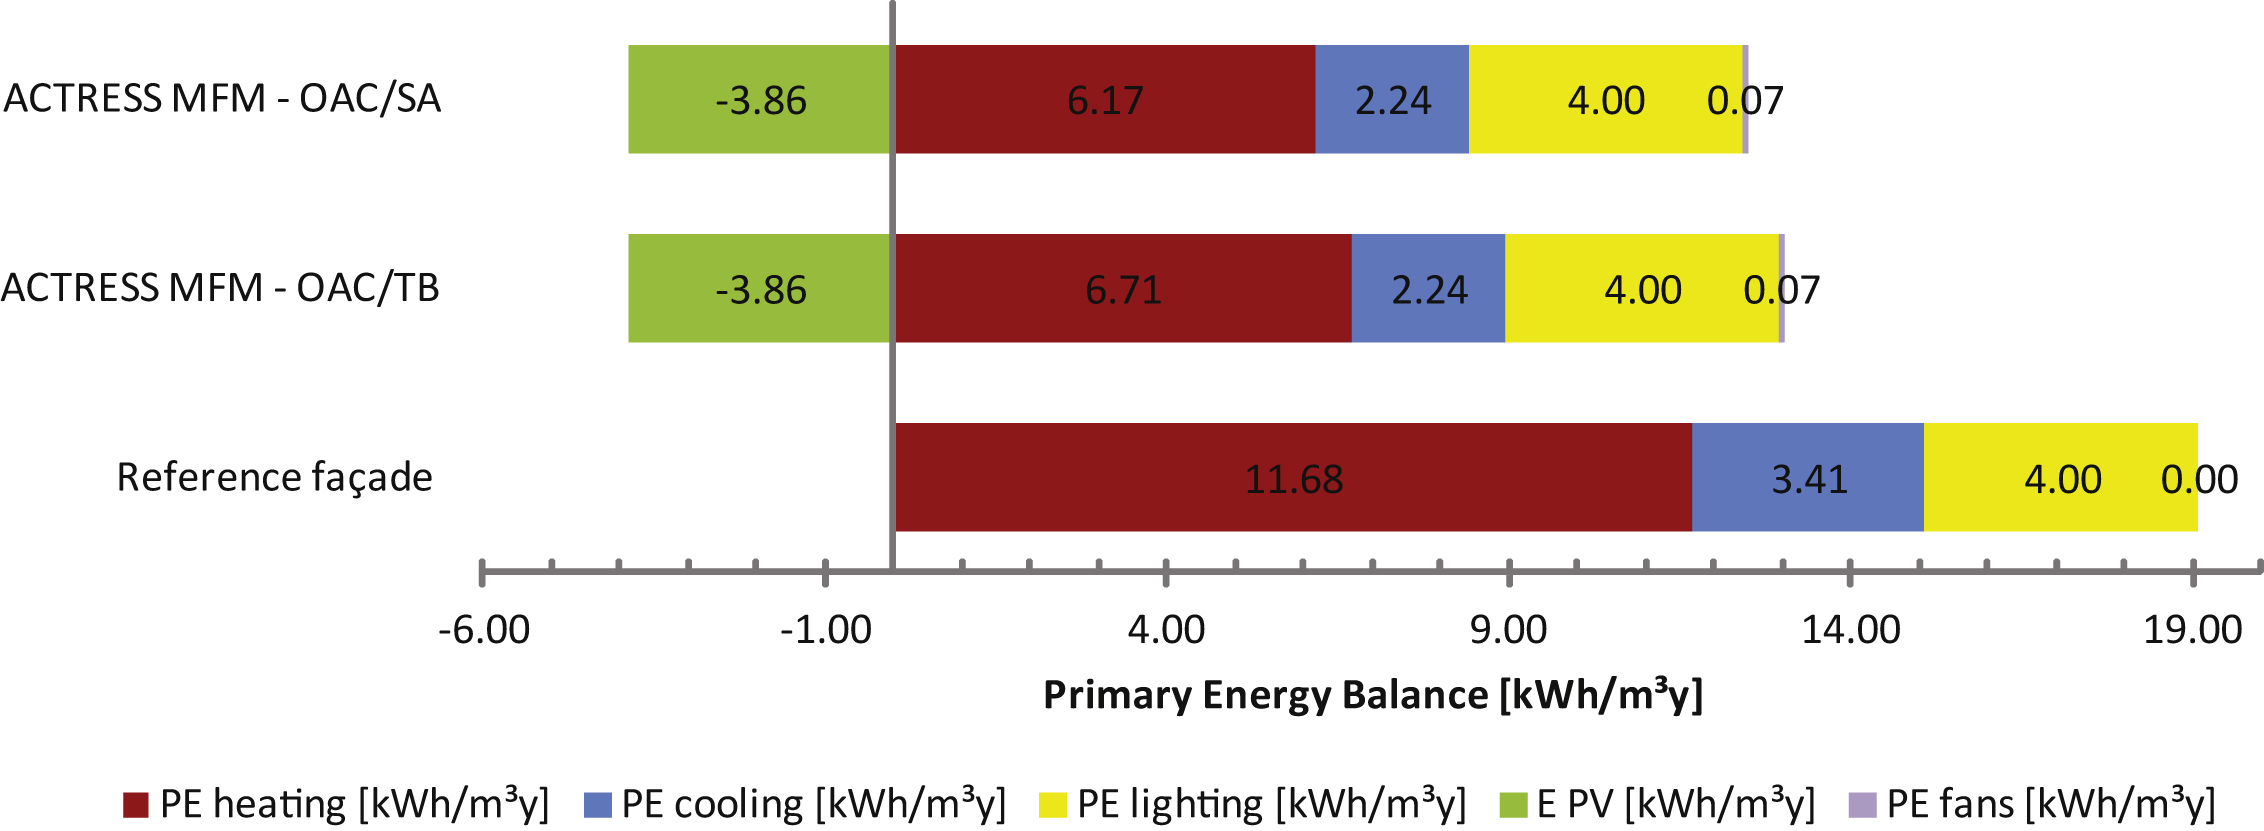 Break up and total specific Primary Energy consumption of the office room with the different facade options.